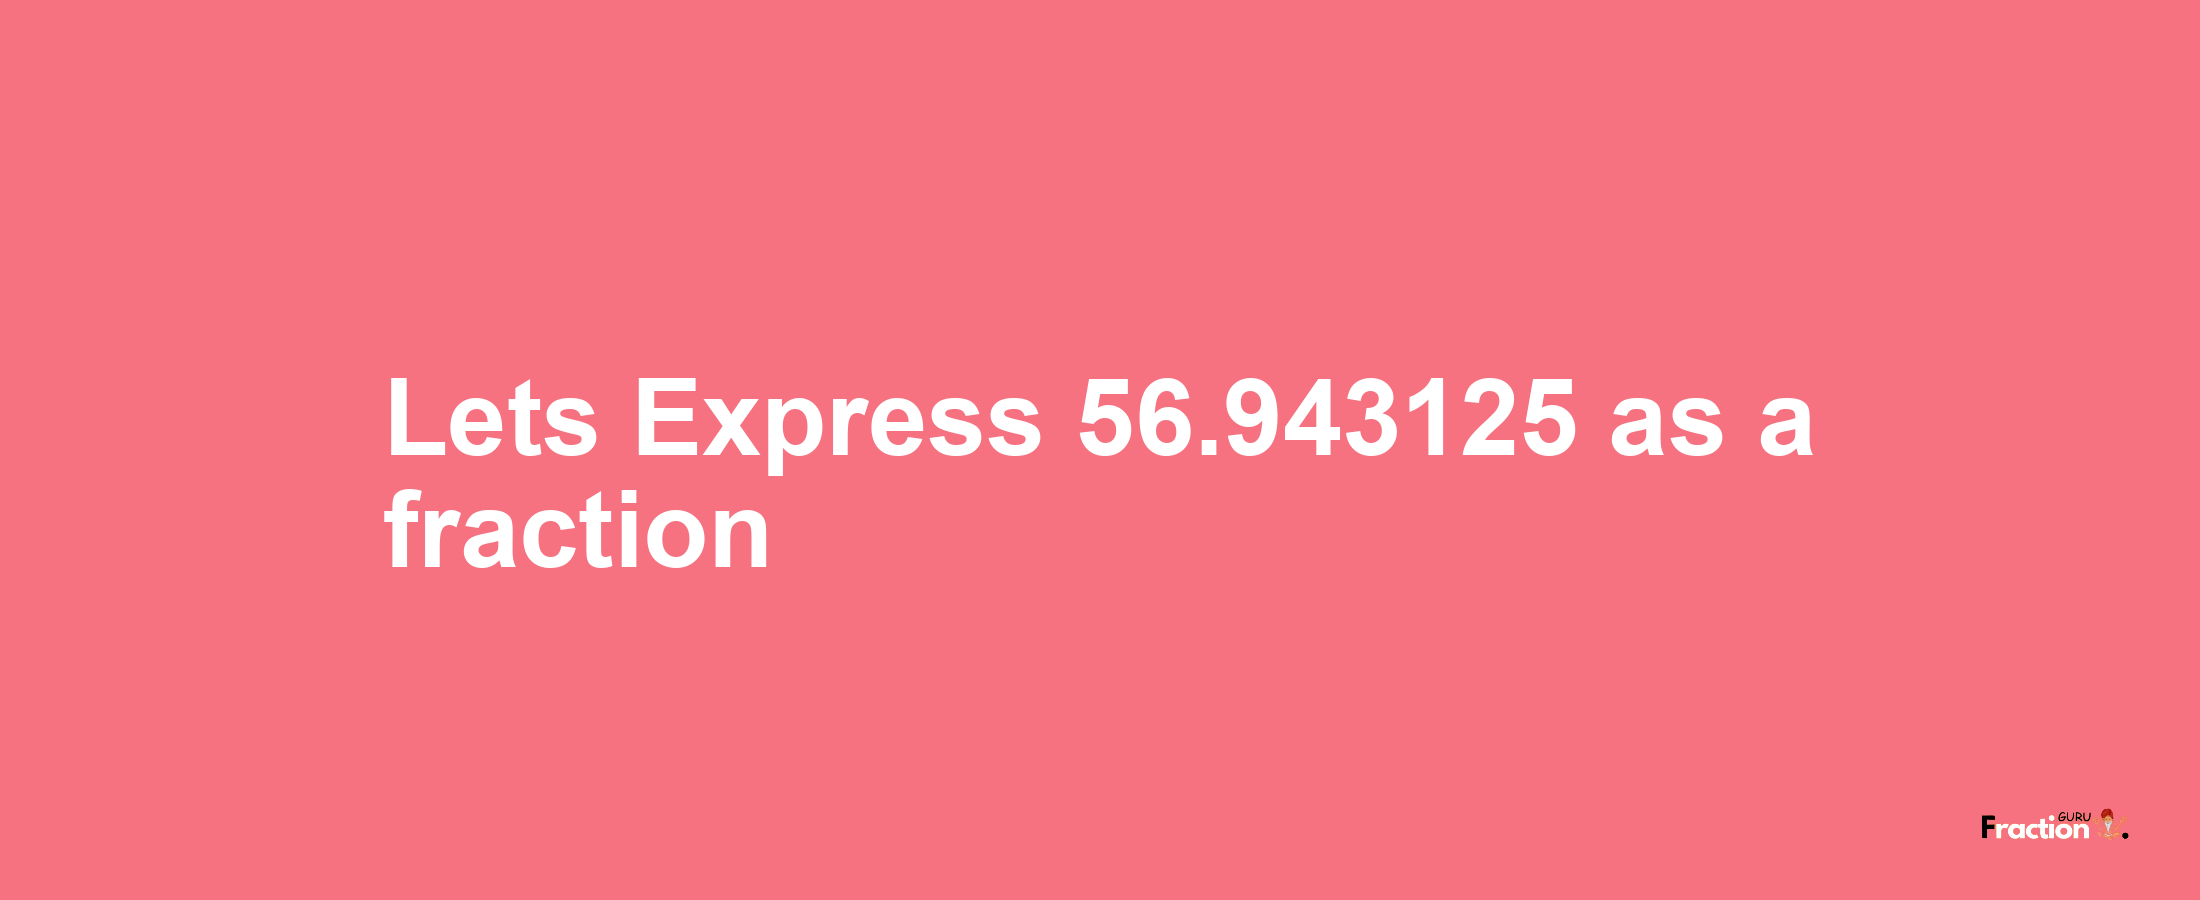 Lets Express 56.943125 as afraction